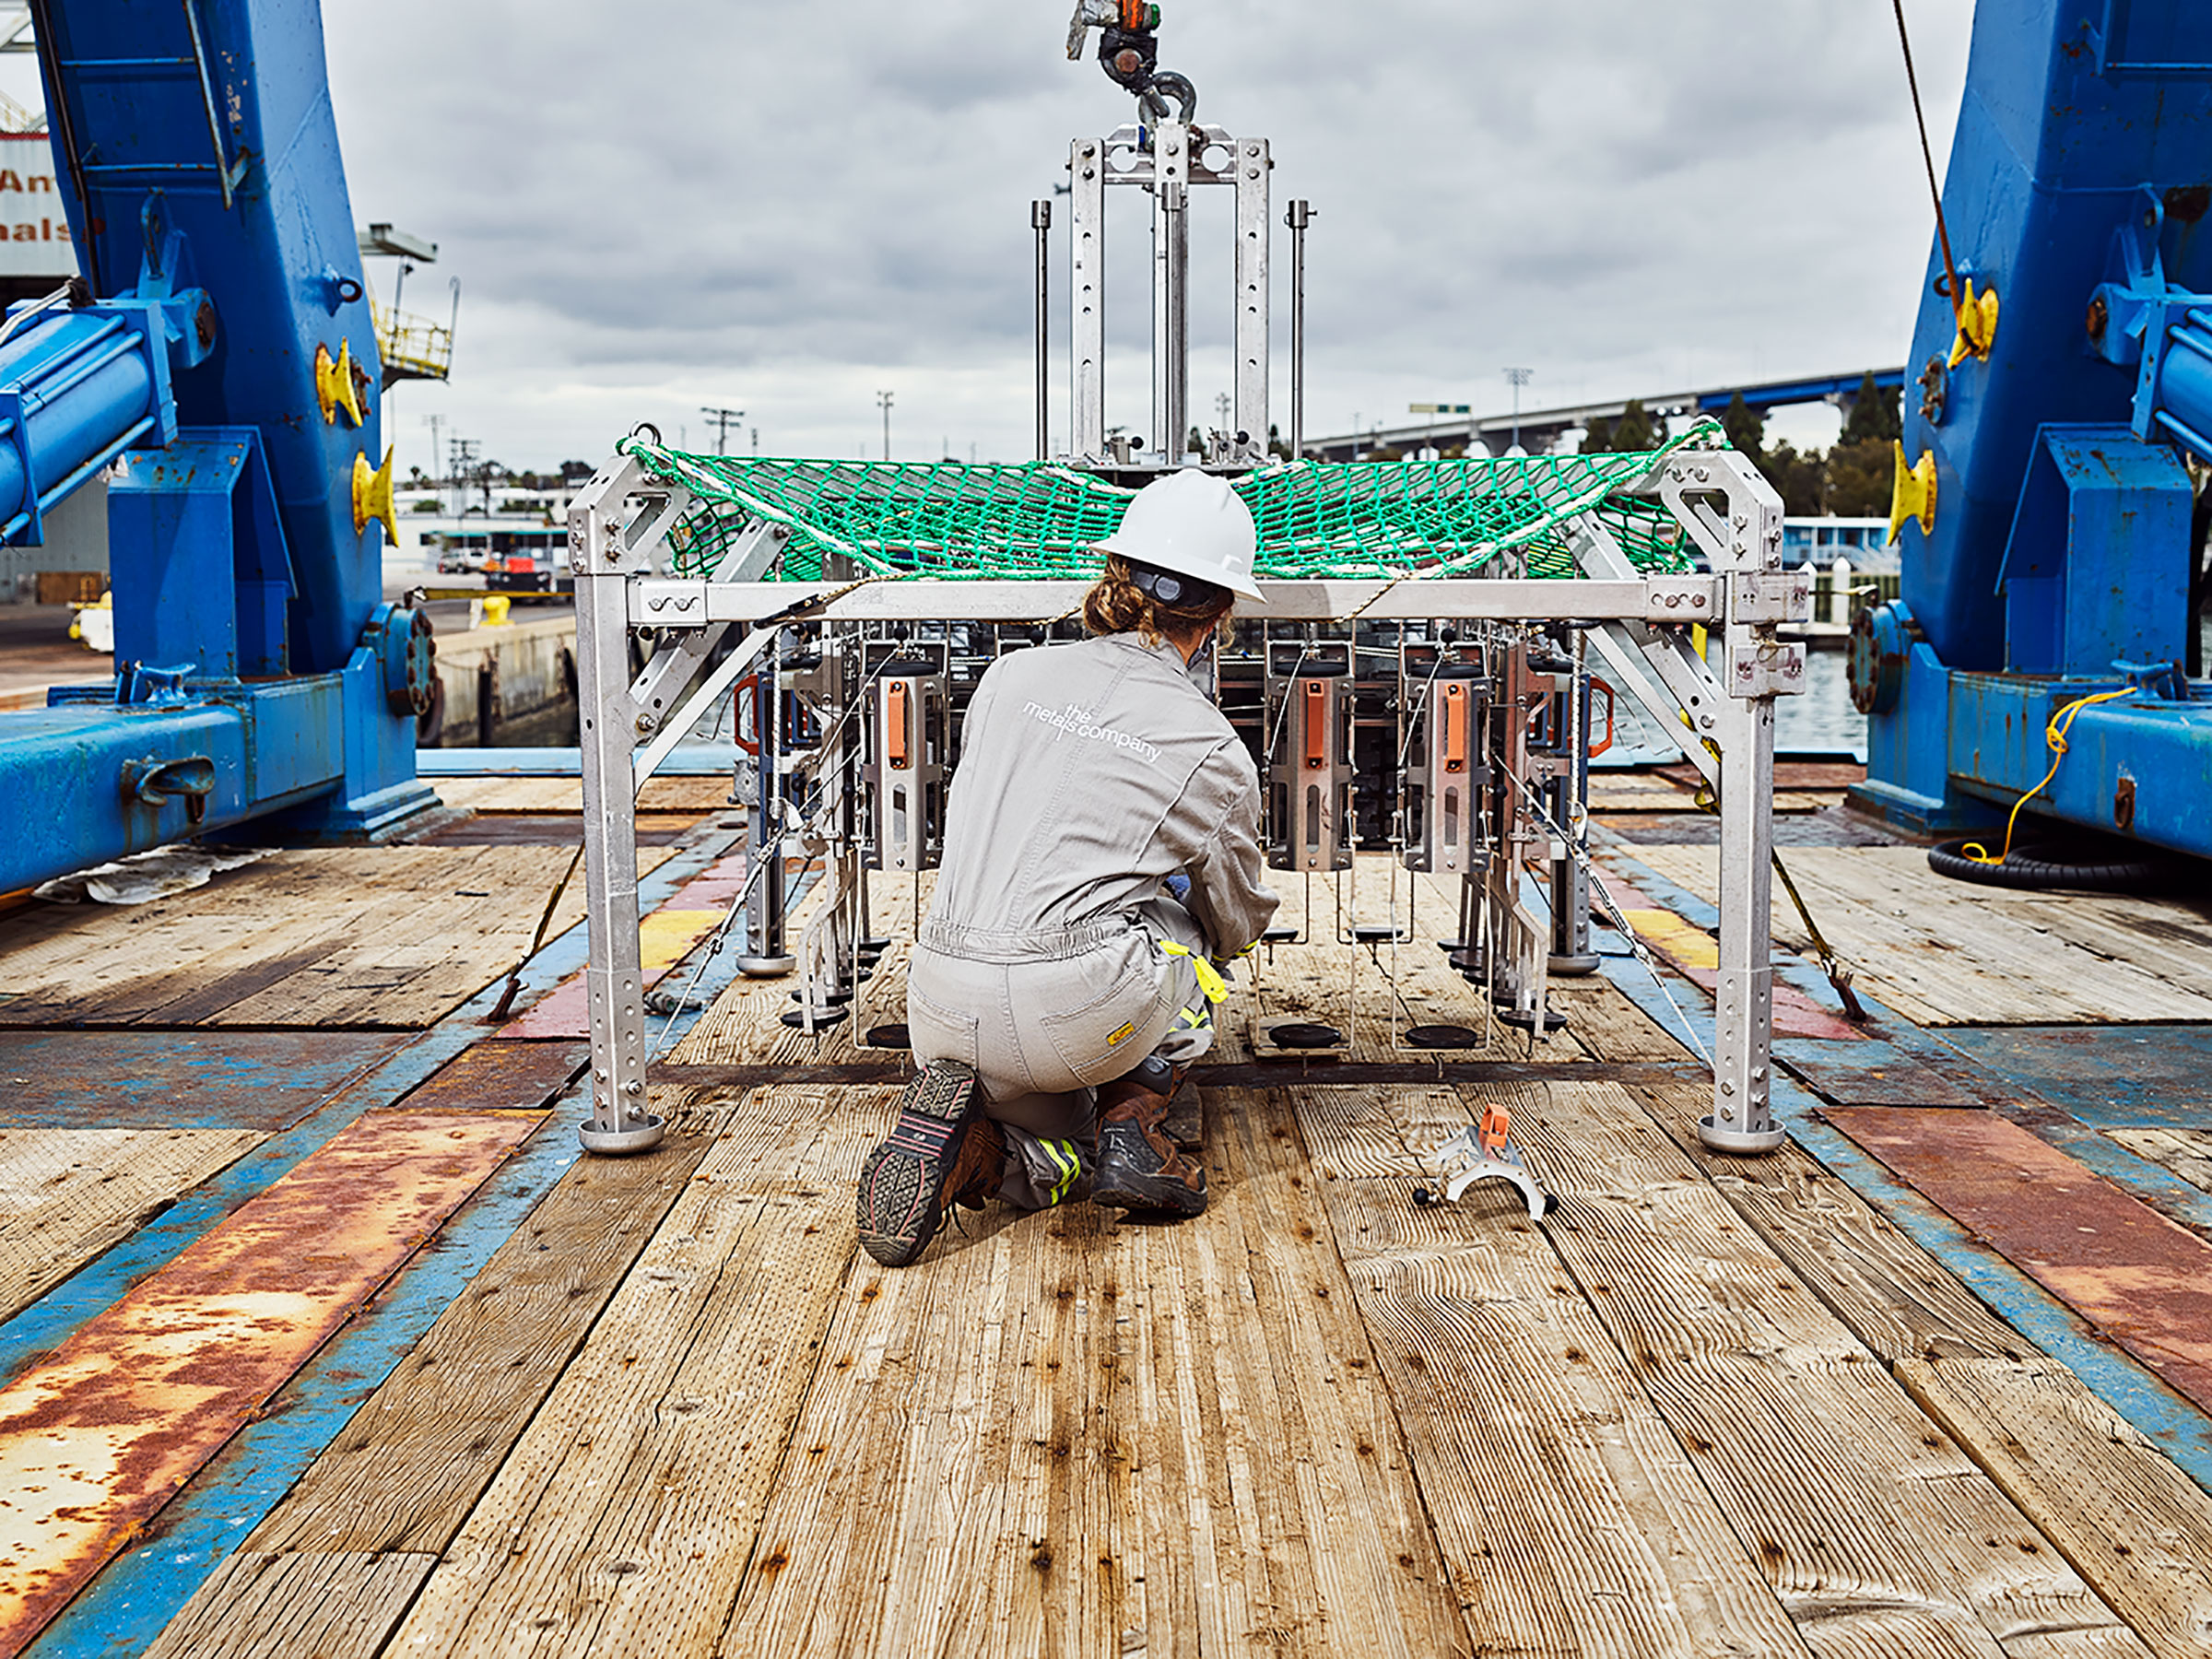 A Metals Company core-sample collector shown at a harbor in San Diego on June 8, after returning from a deep-sea-mining mission. (Spencer Lowell for TIME)